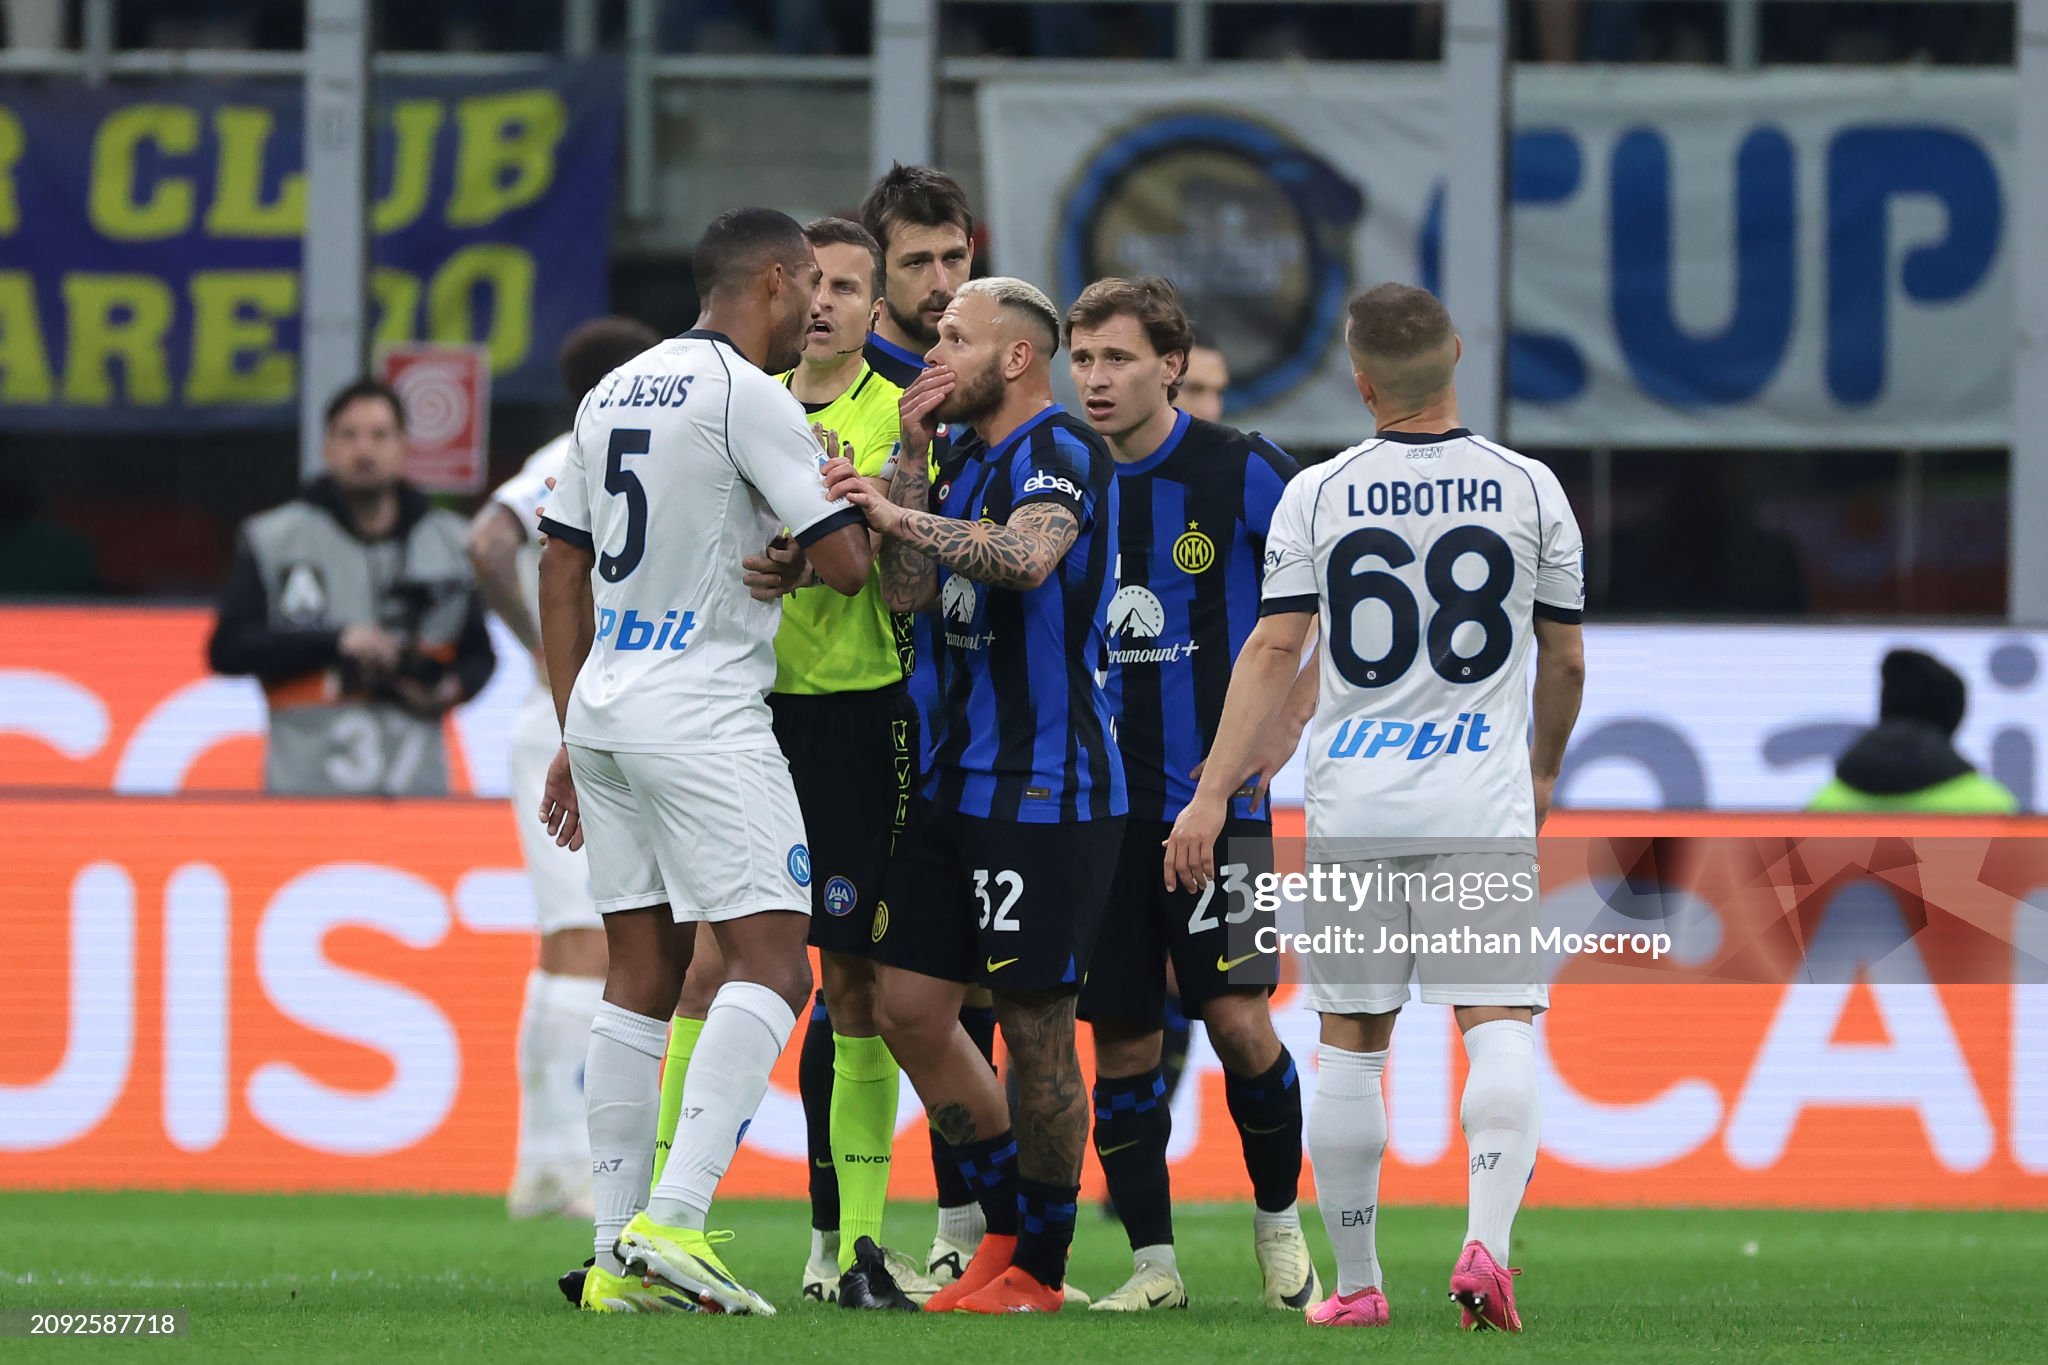 Inter player Acerbi accused of racism during match with Napoli